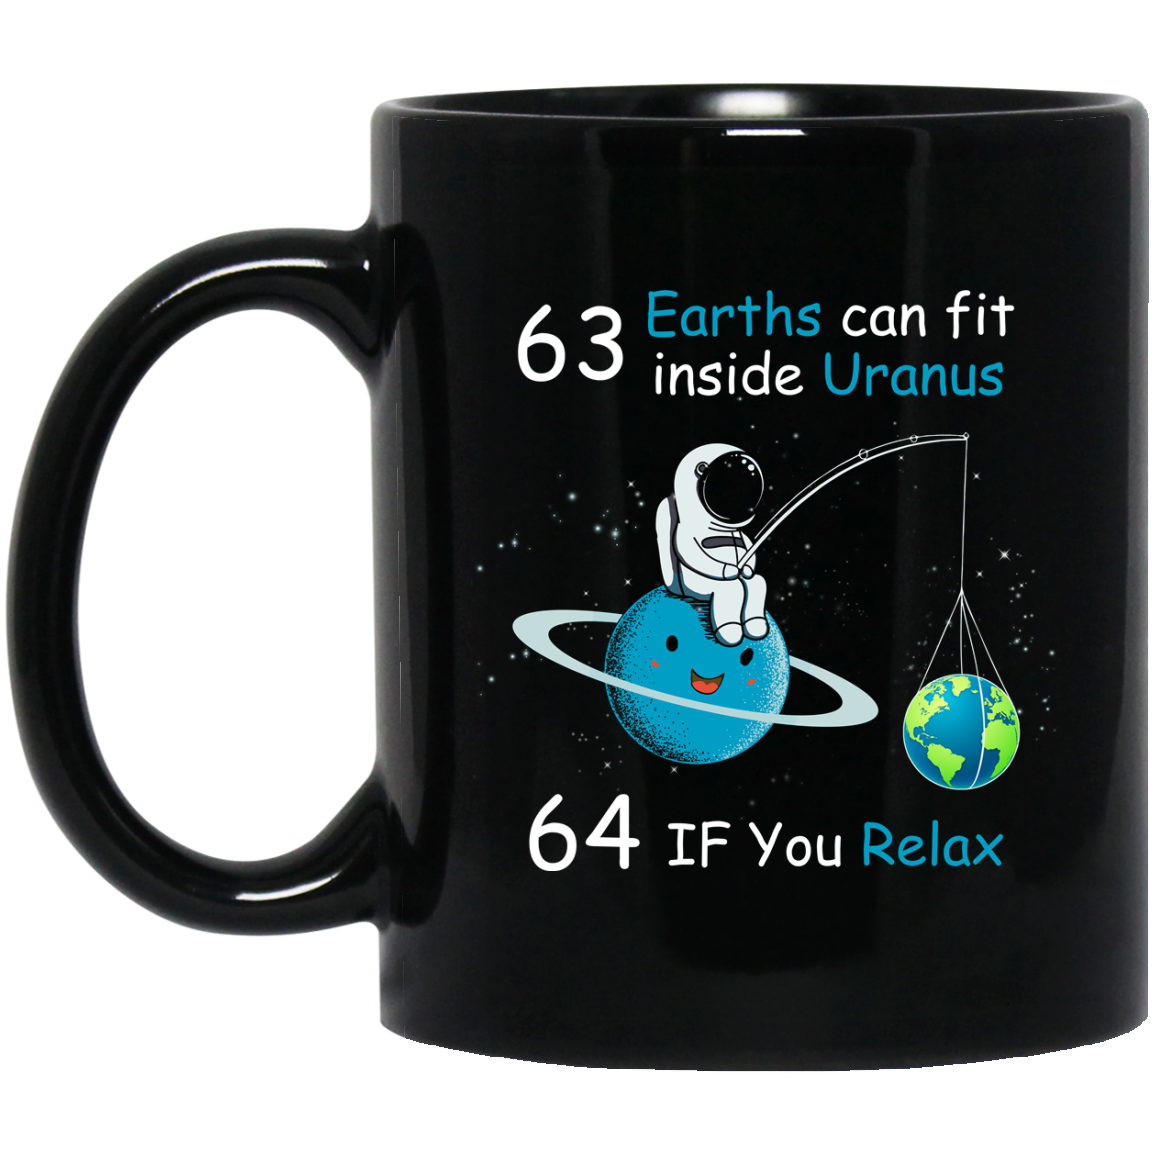 63 earths can fit inside uranus 64 if you relax - 63 Earths can fit inside Uranus 64 If You Relax